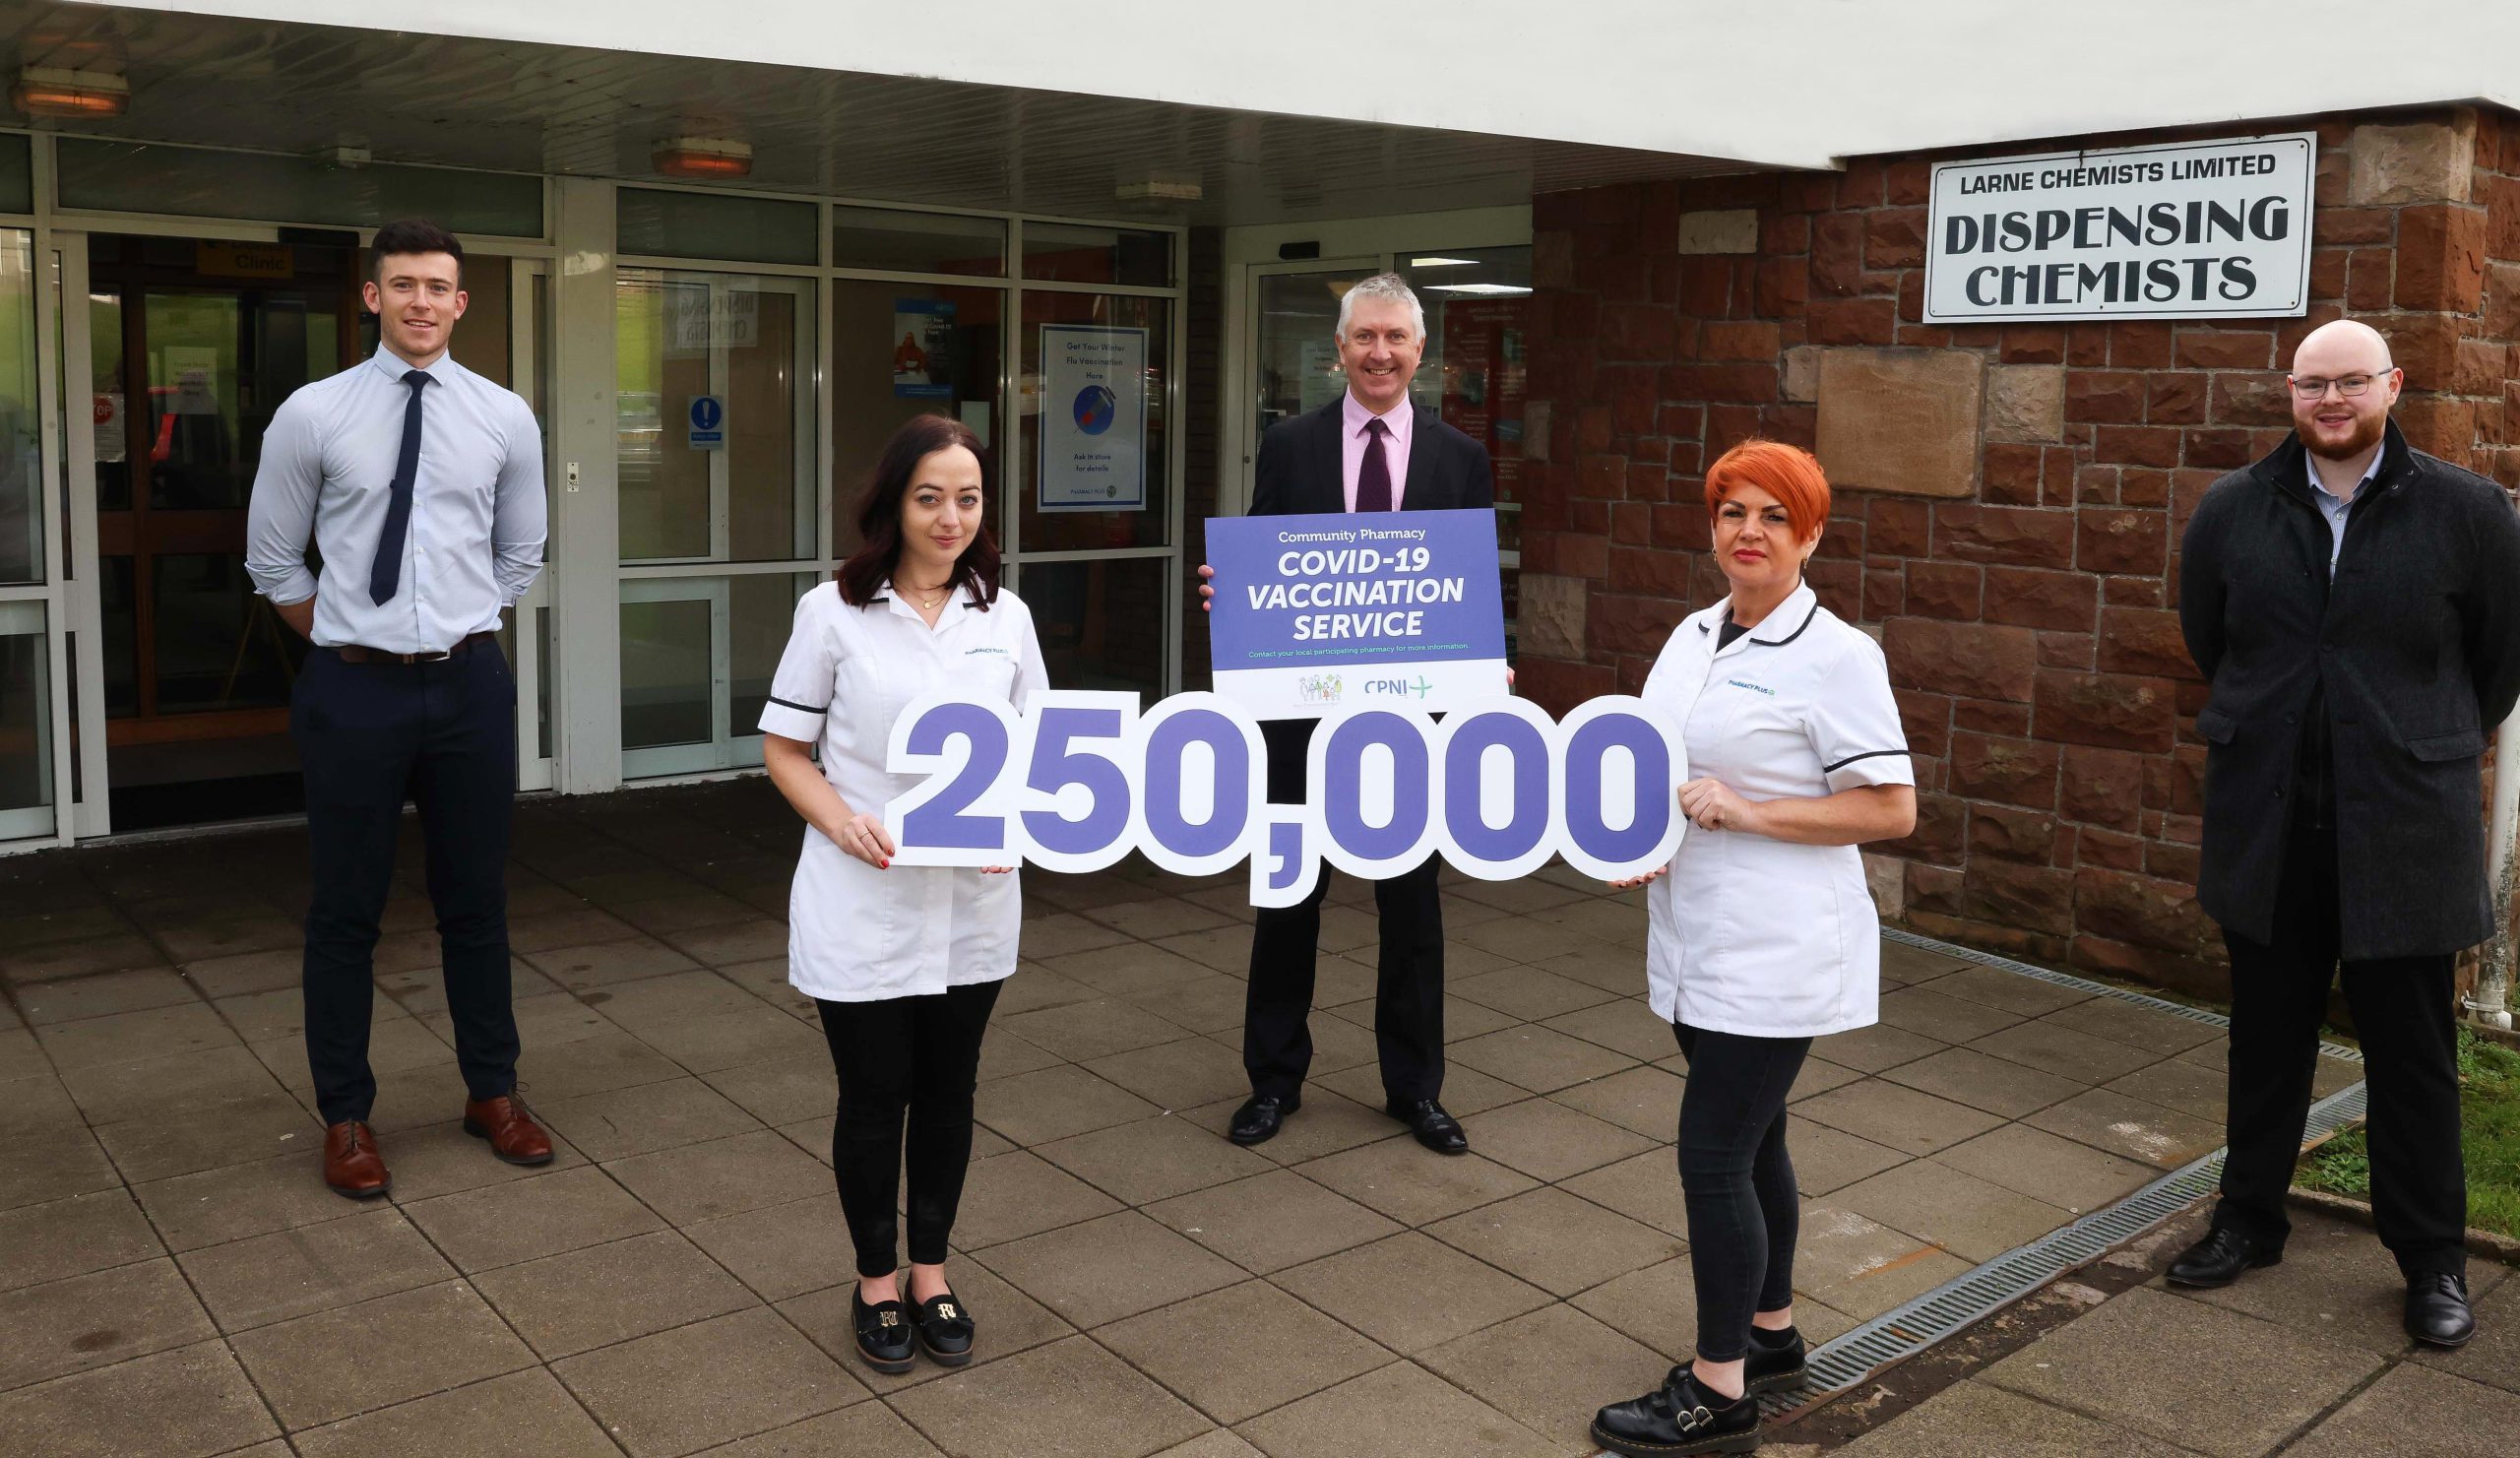 Community pharmacy surpasses 250,000 COVID-19 vaccination milestone as booster service continues at pace